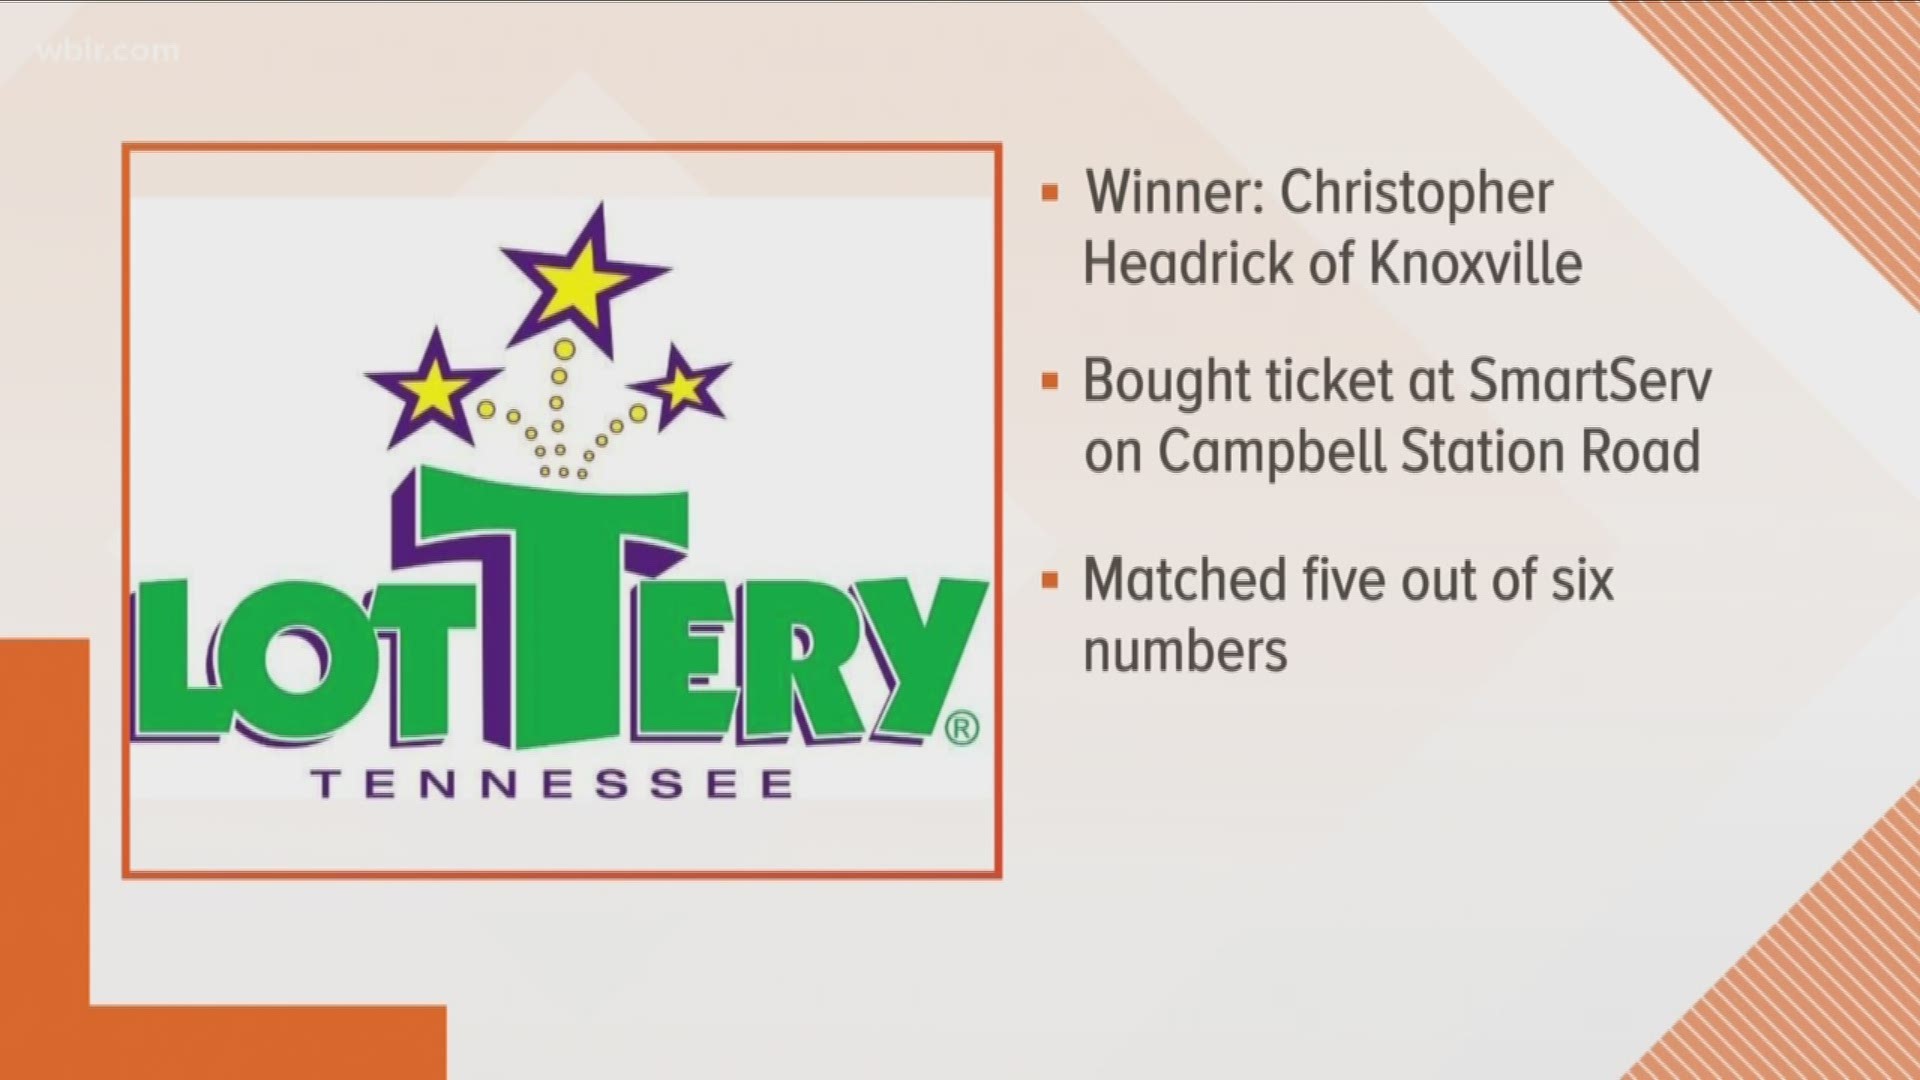 The Tennessee Lottery says he bought the ticket at the SmartServ on Campbell Station Road. Hewas so close to the jackpot... he matched five out of six numbers.